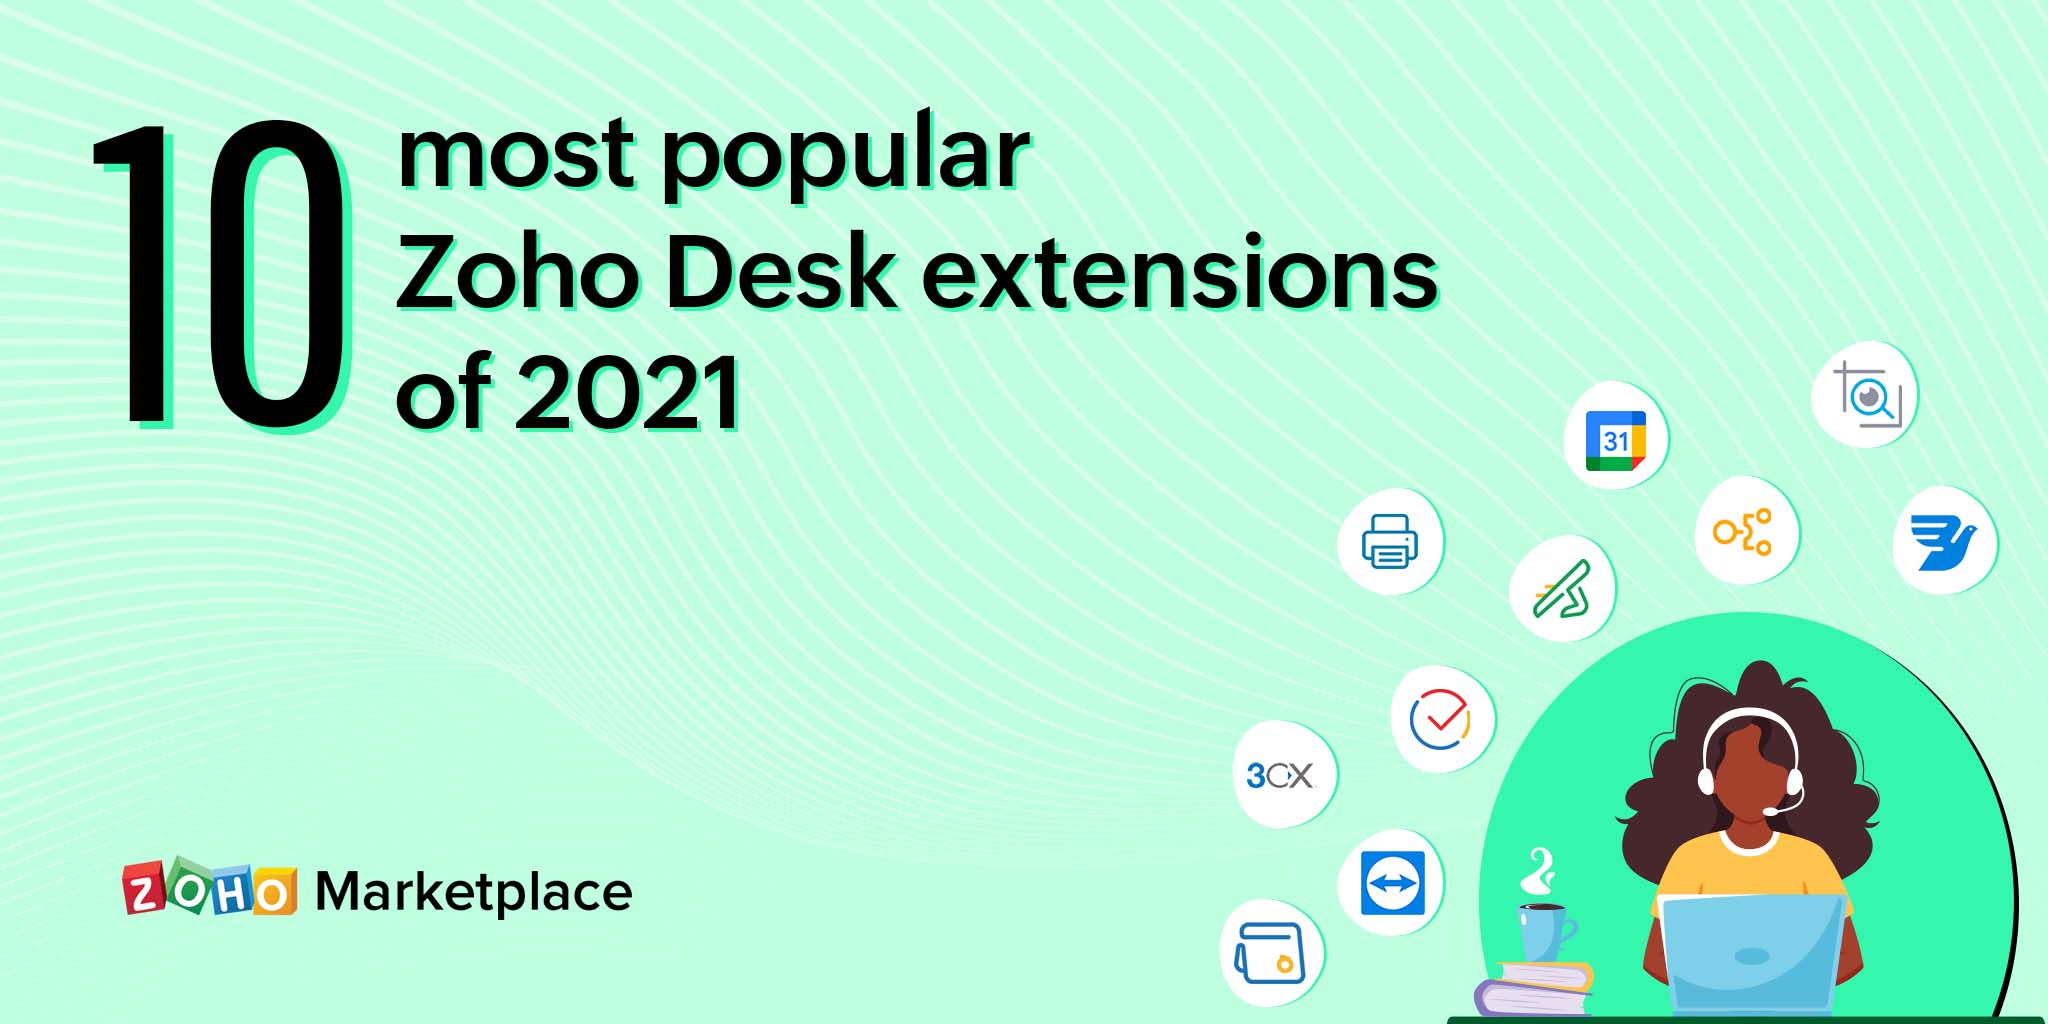 10 most popular Zoho Desk extensions of 2021